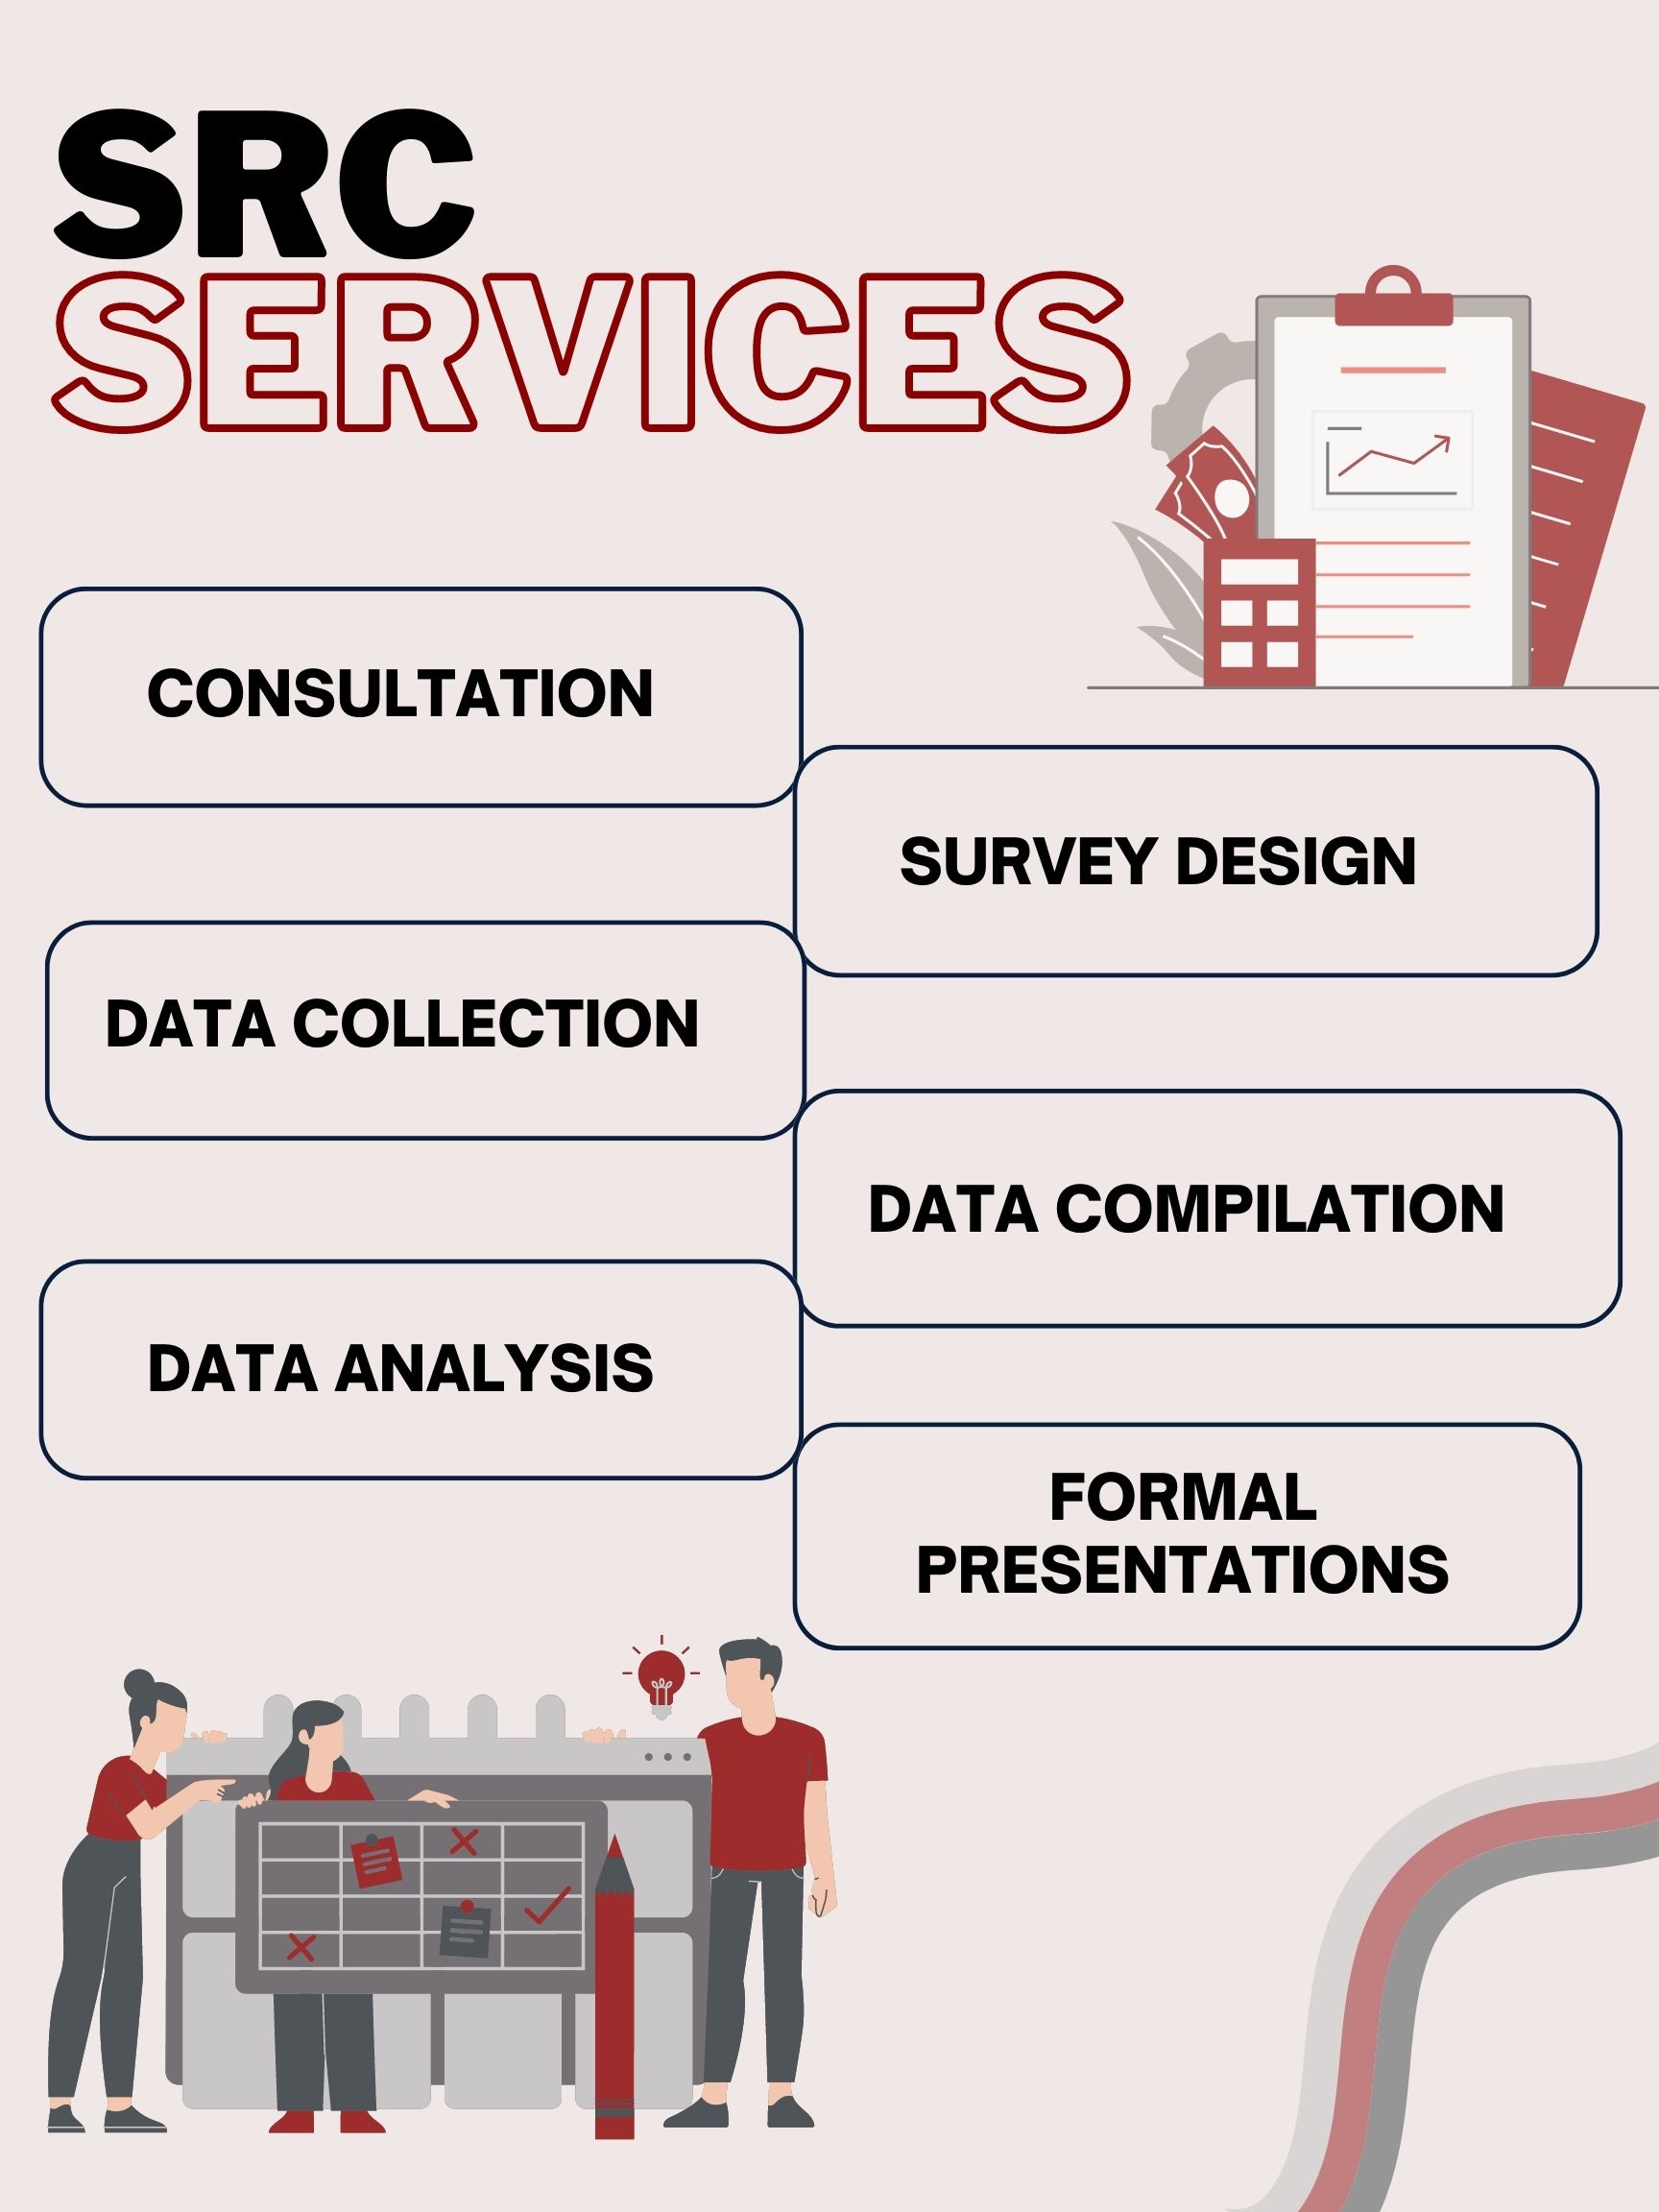 Our Services Poster